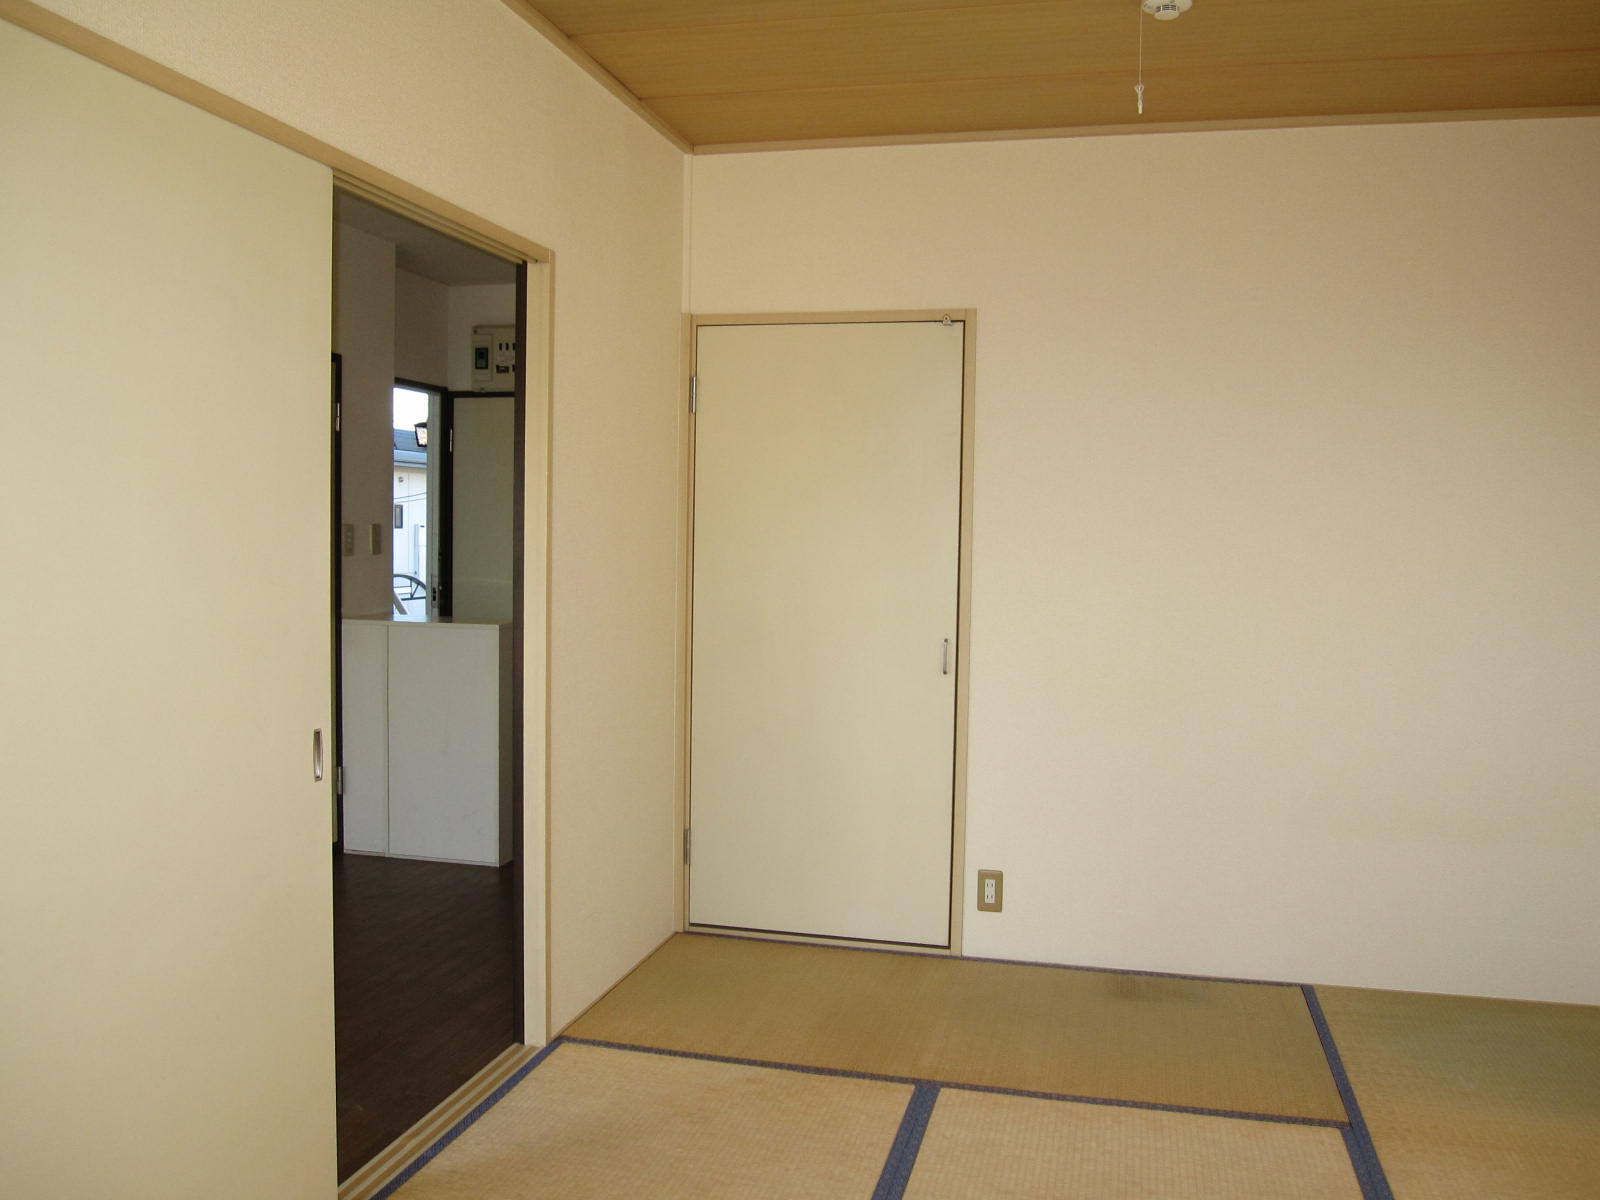 Living and room. Tatami will be replaced before occupancy.